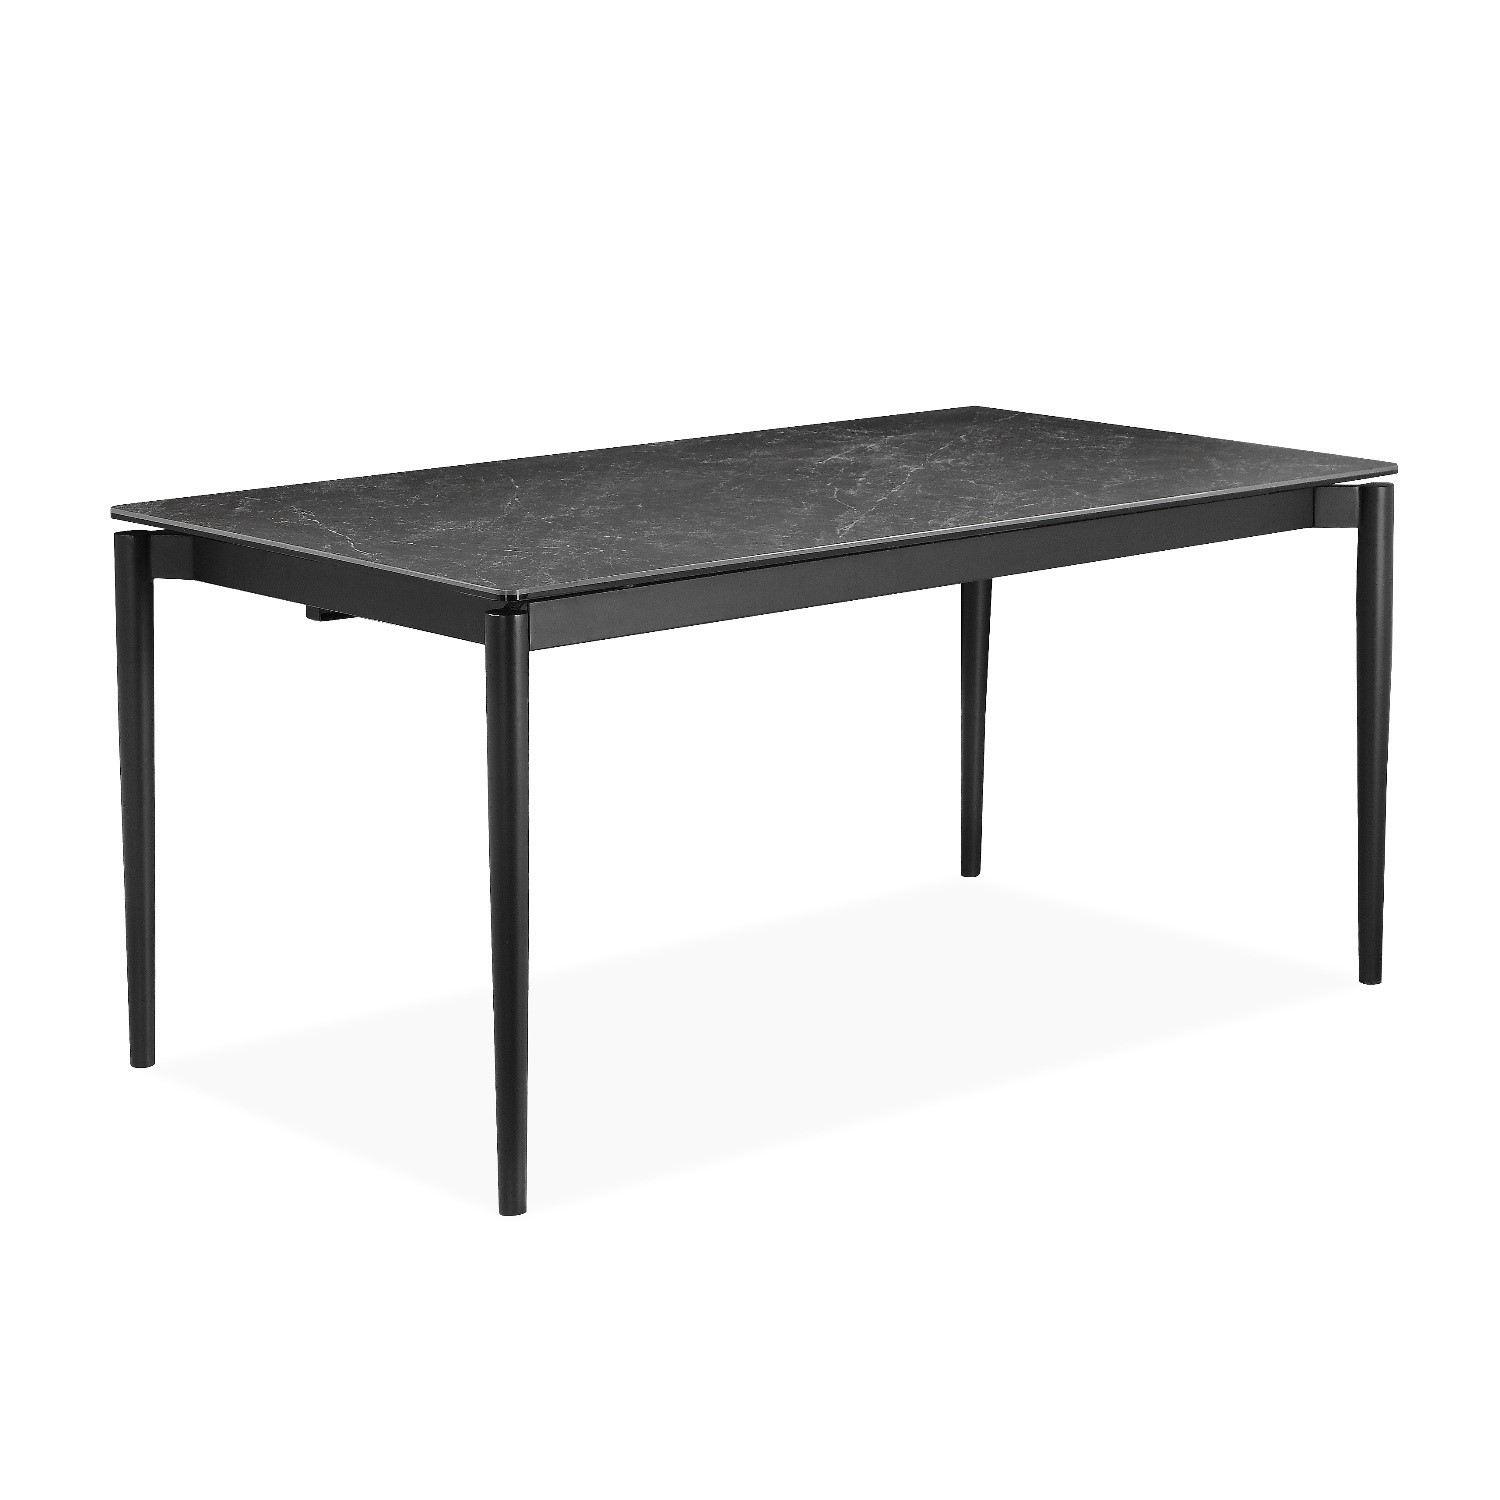 Photo of Marble effect extendable ceramic dining table in black - seats 6-8 - camilla